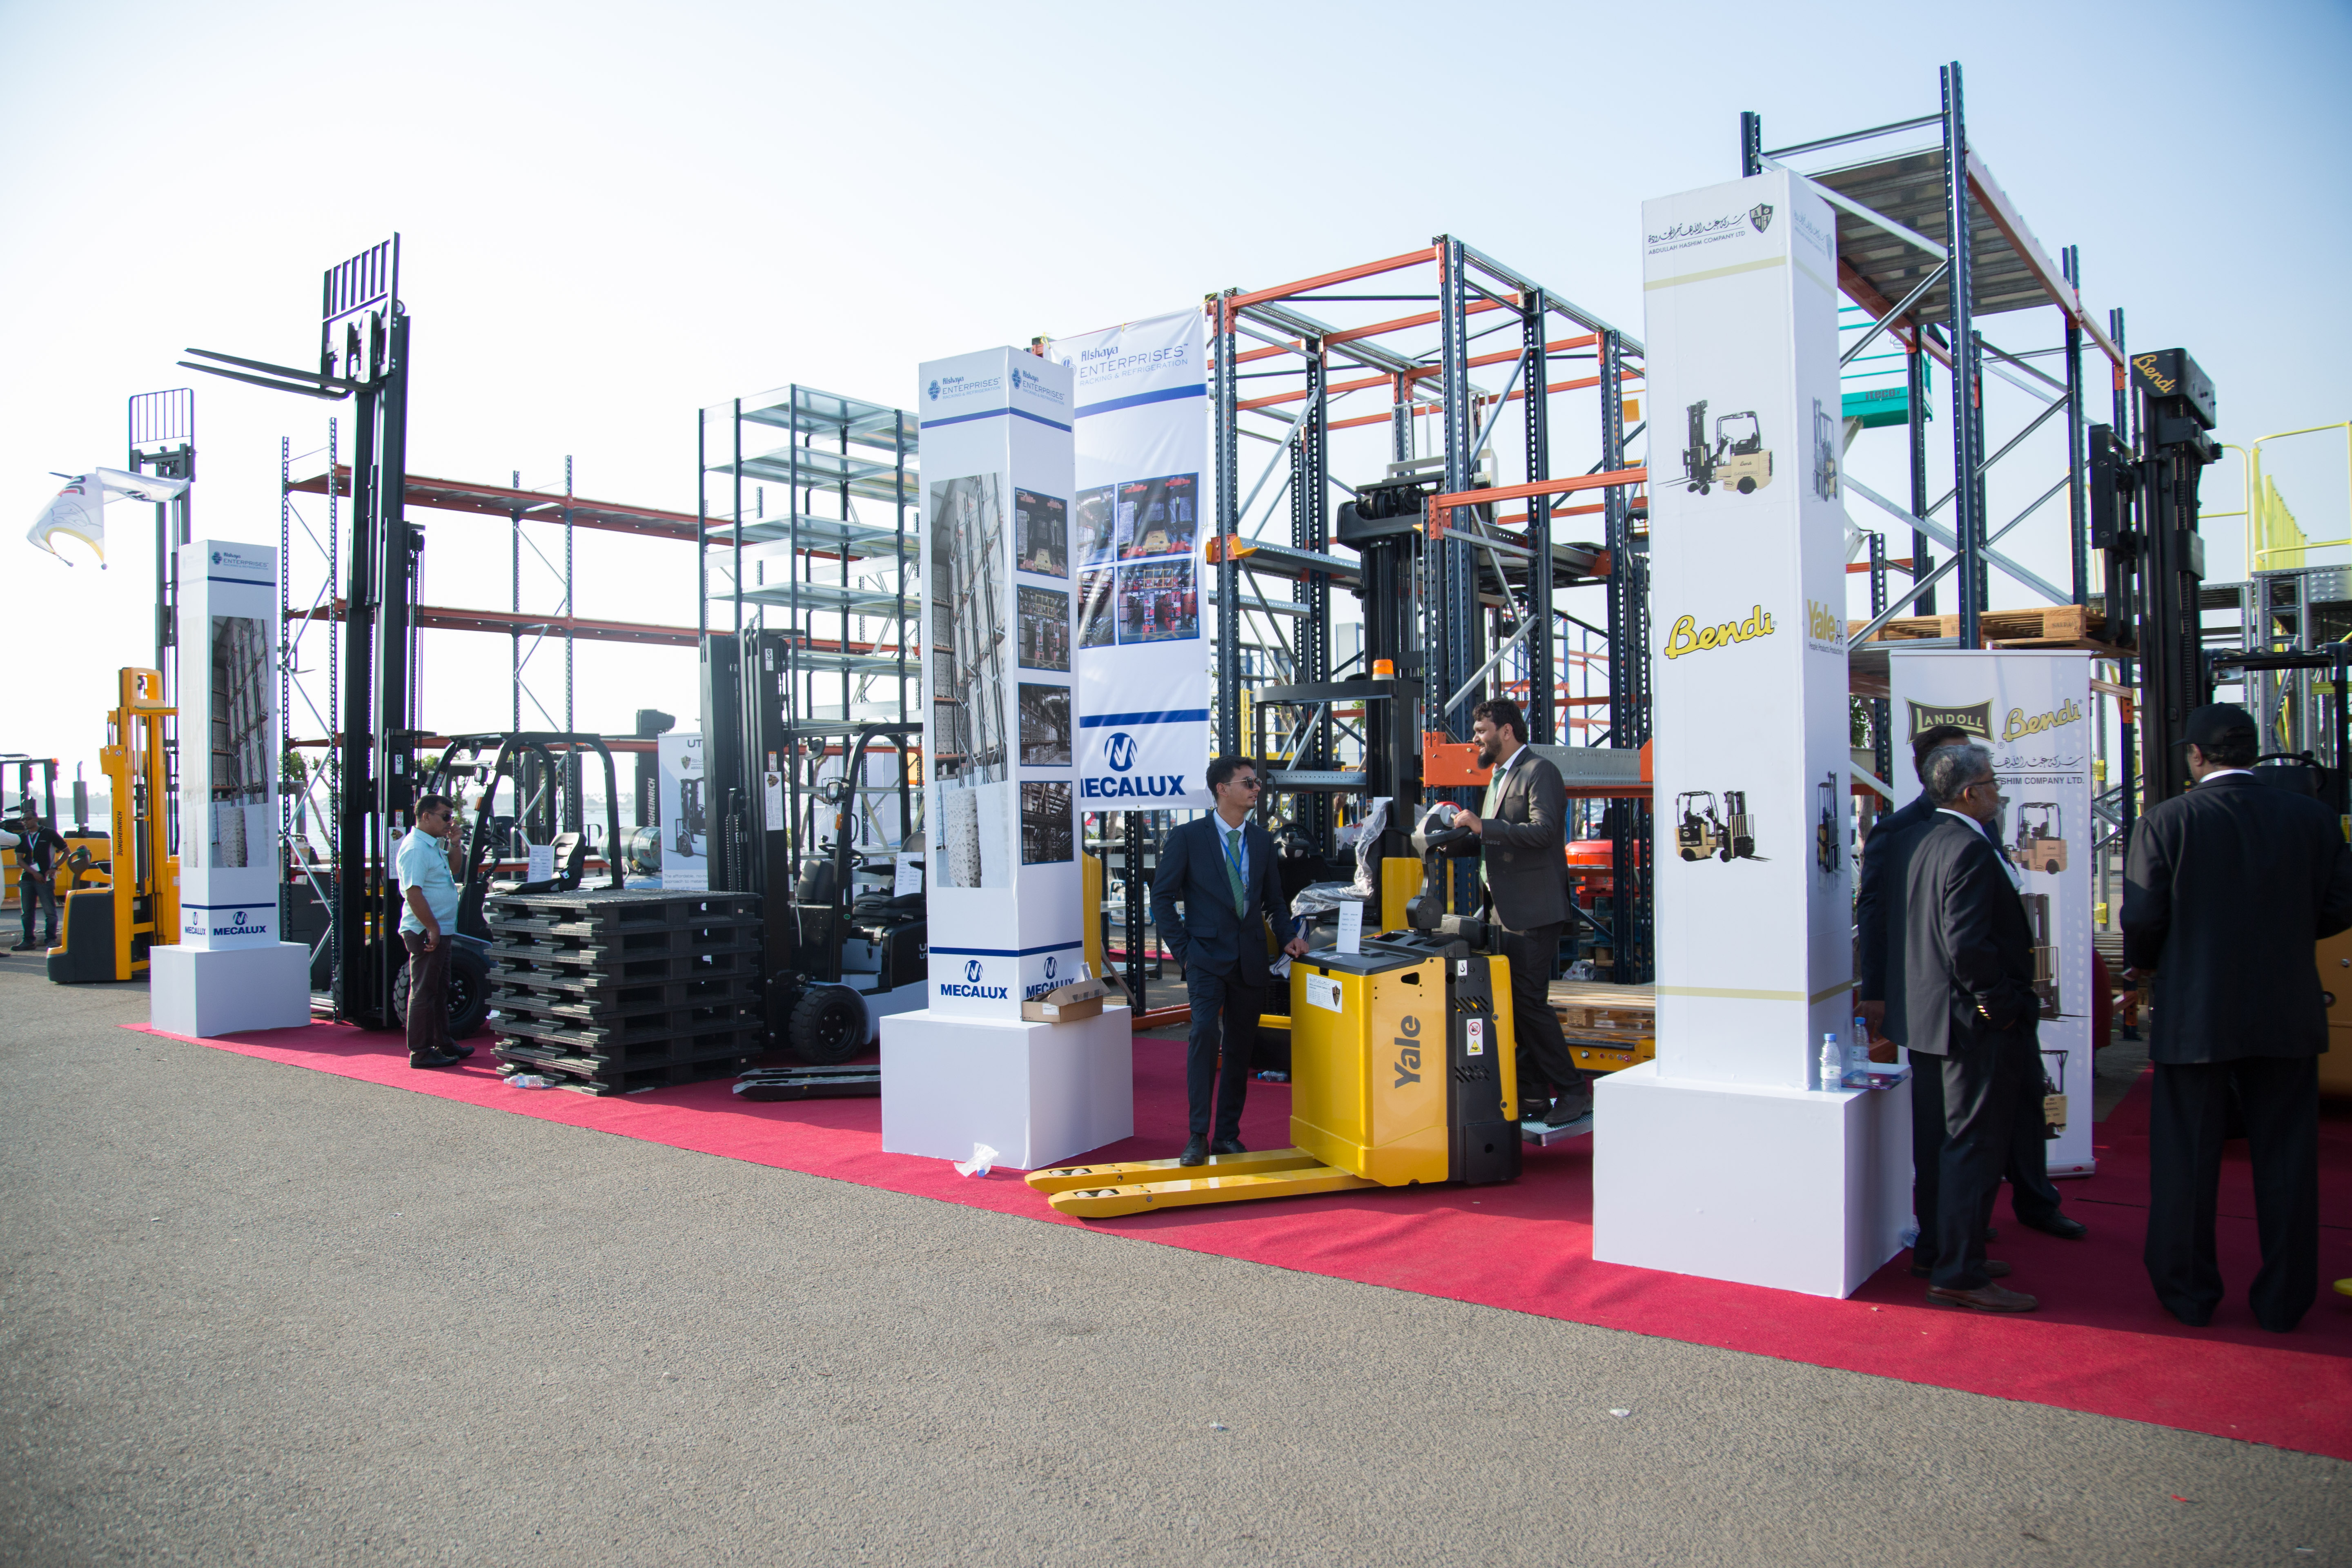 Materials Handling Middle East